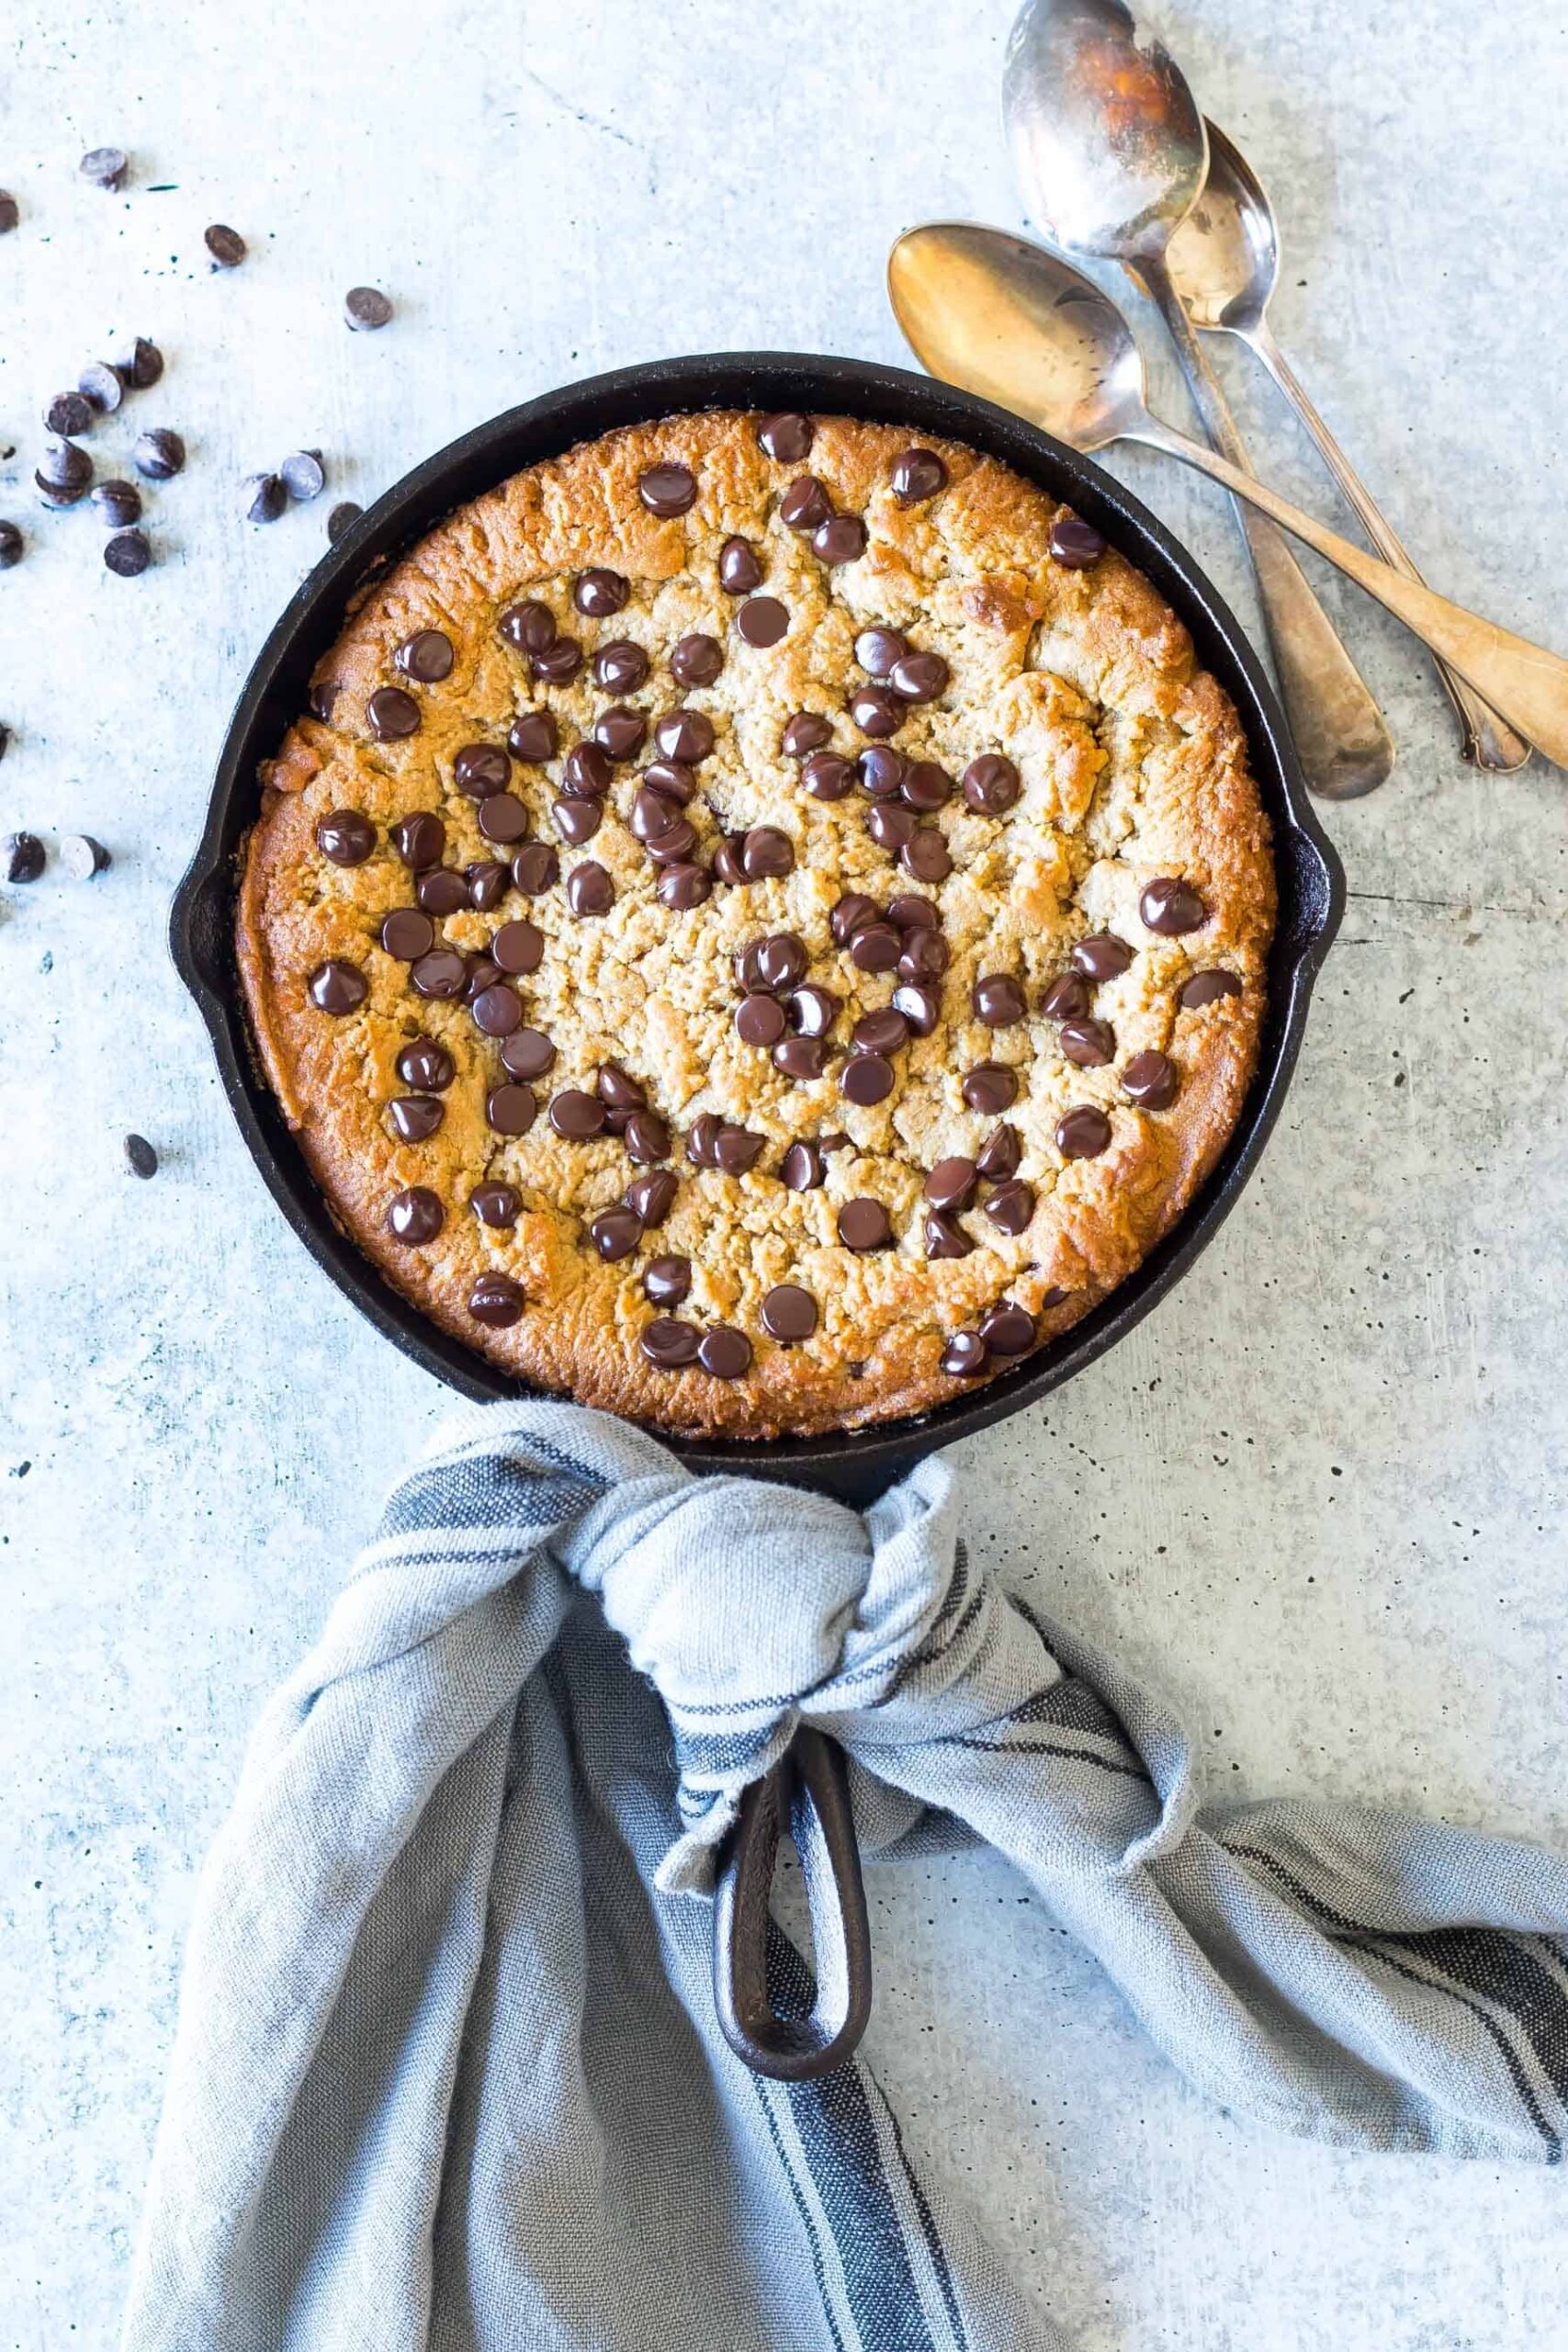 Finished Keto Chocolate Chip Peanut Butter Skillet Cookie in a 8 inch skillet